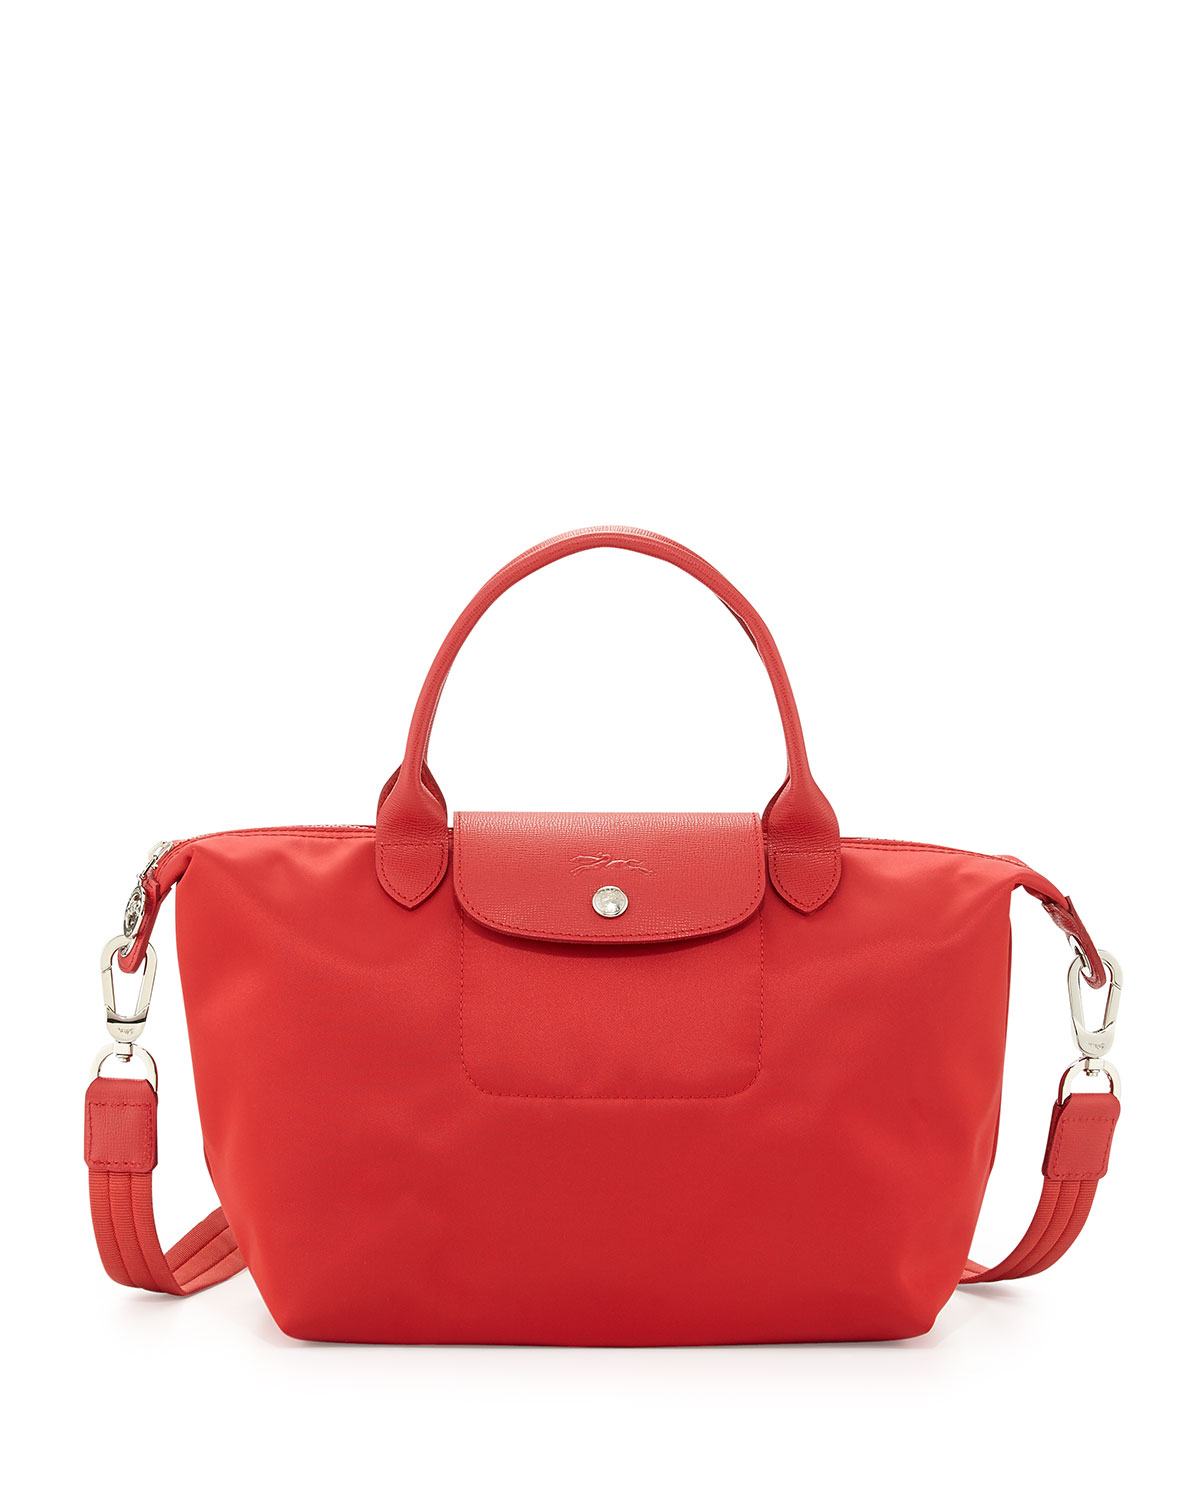 Longchamp Le Pliage Neo Shoulder Tote With Strap in Red (POPPY) | Lyst